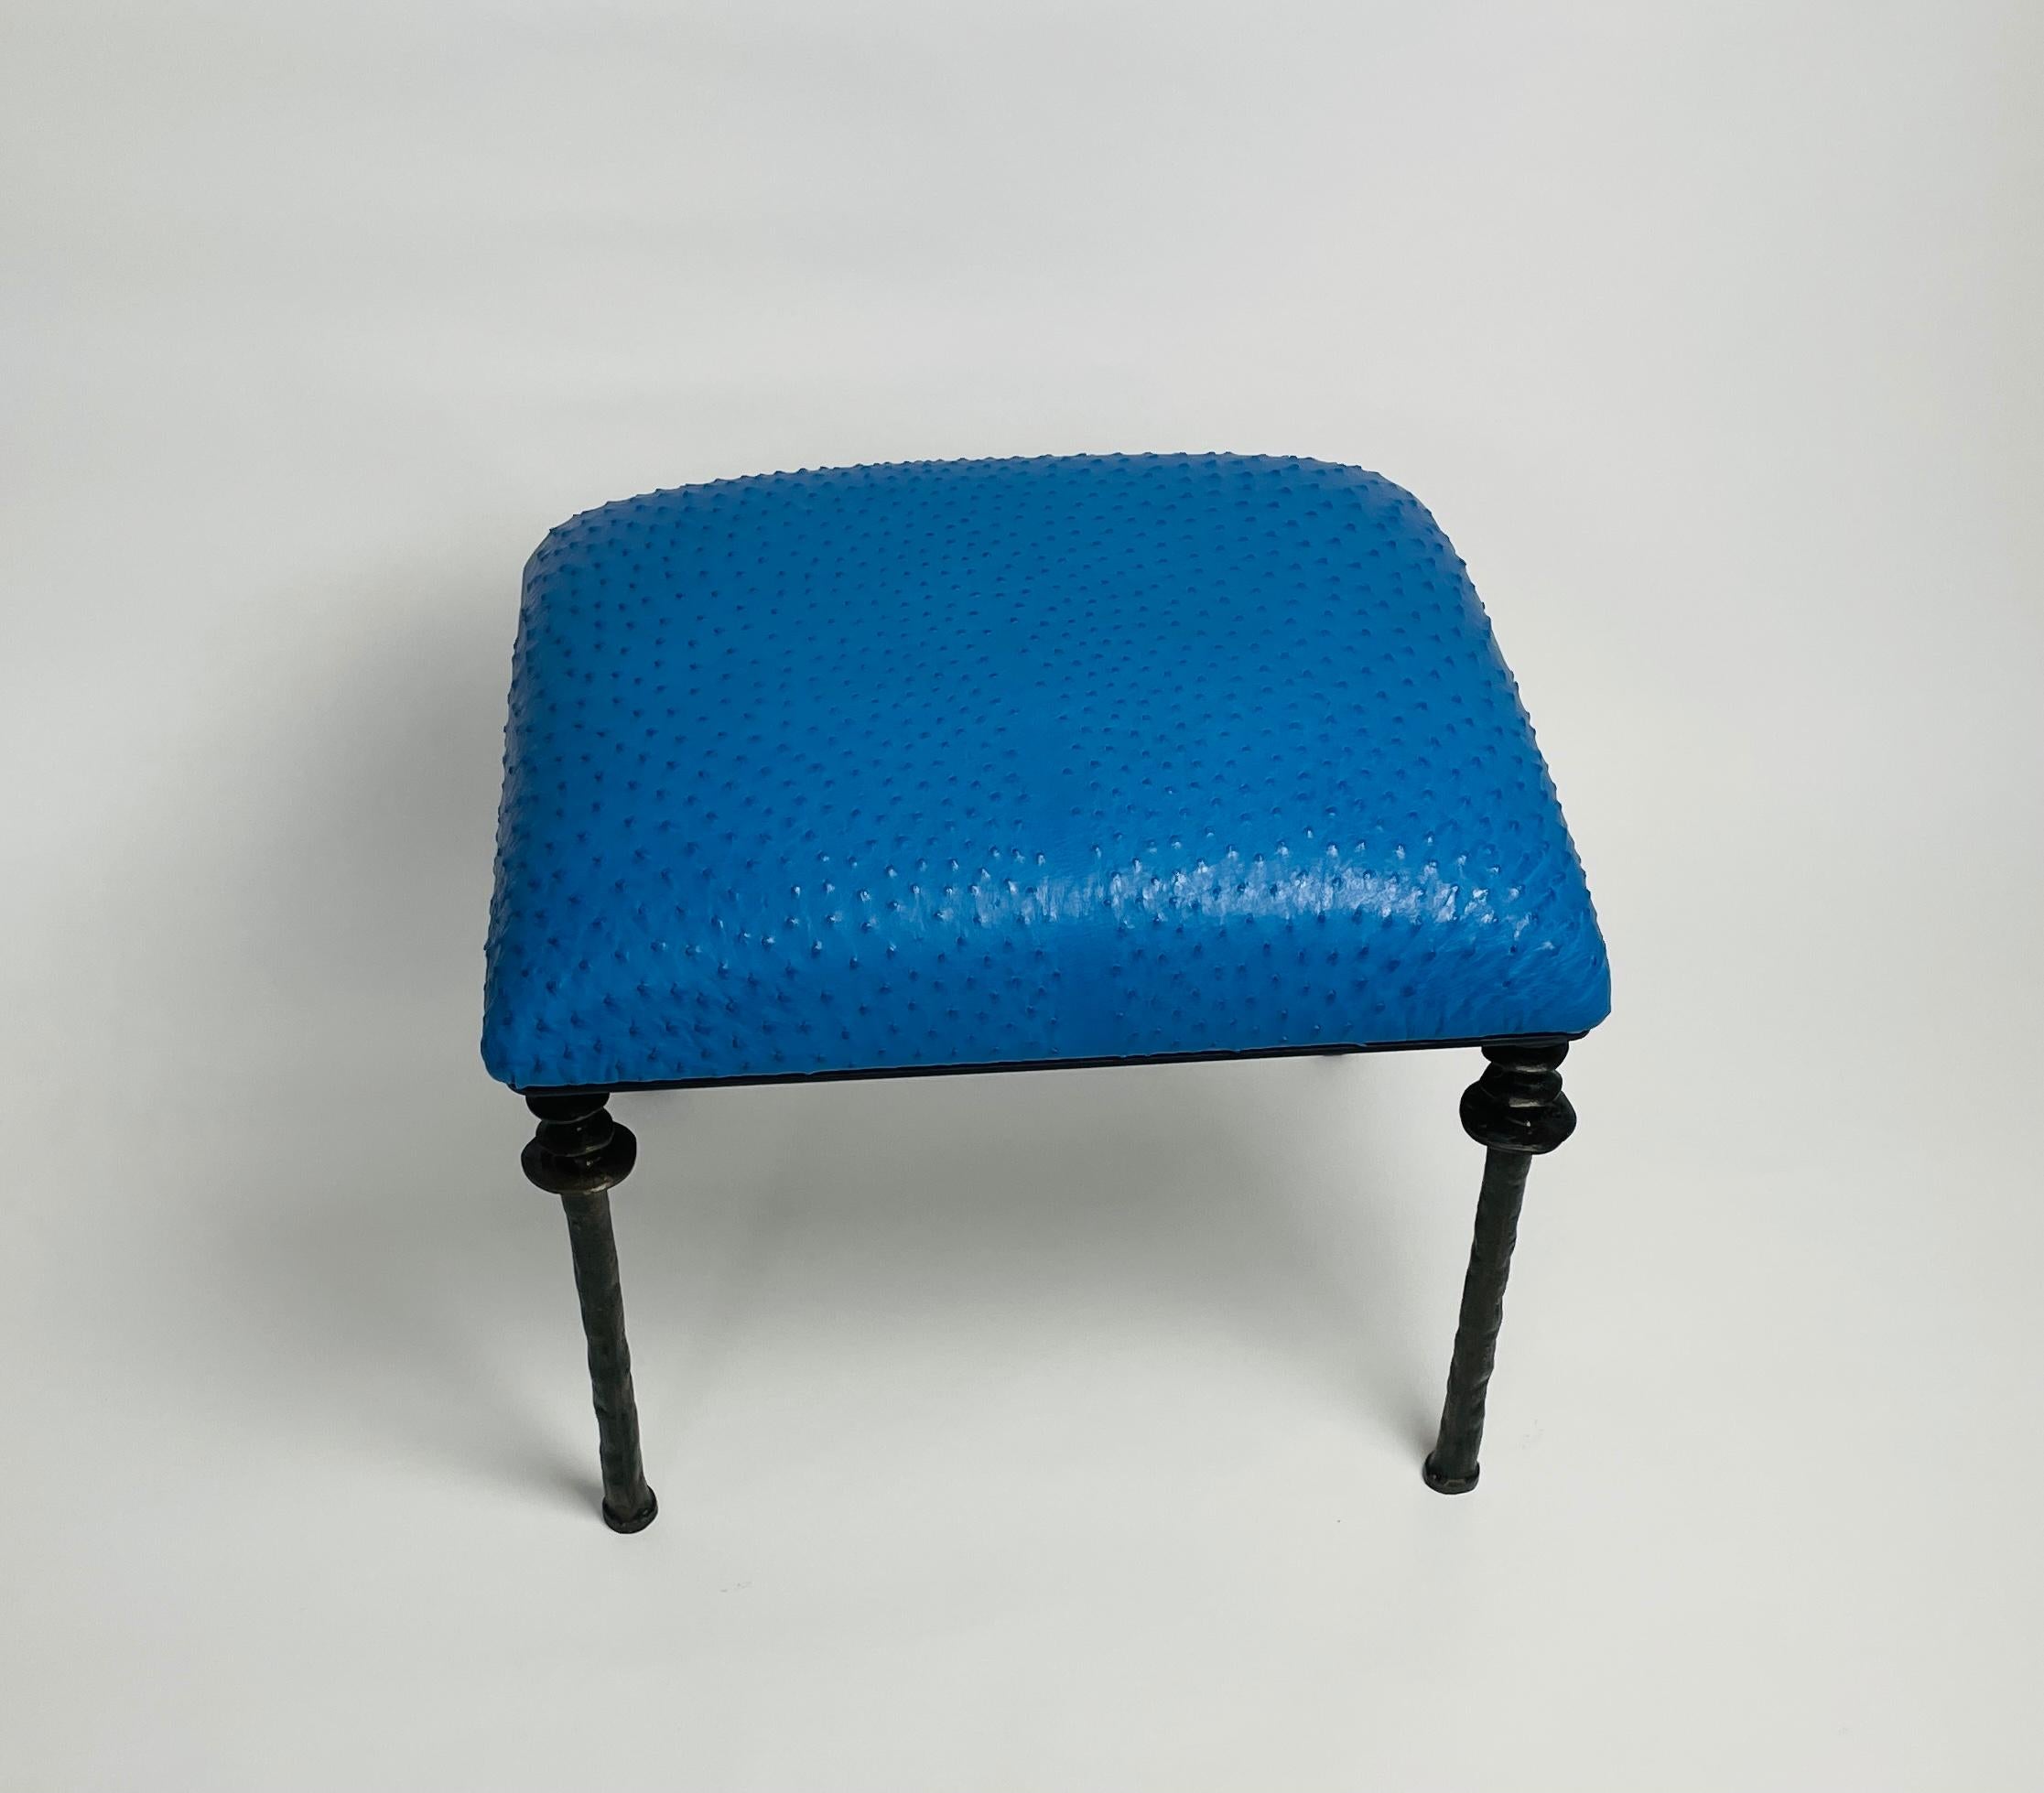 Pair of Sorgue Stools, by Bourgeois Boheme Atelier, Blue Ostrich Leather In New Condition For Sale In Los Angeles, CA